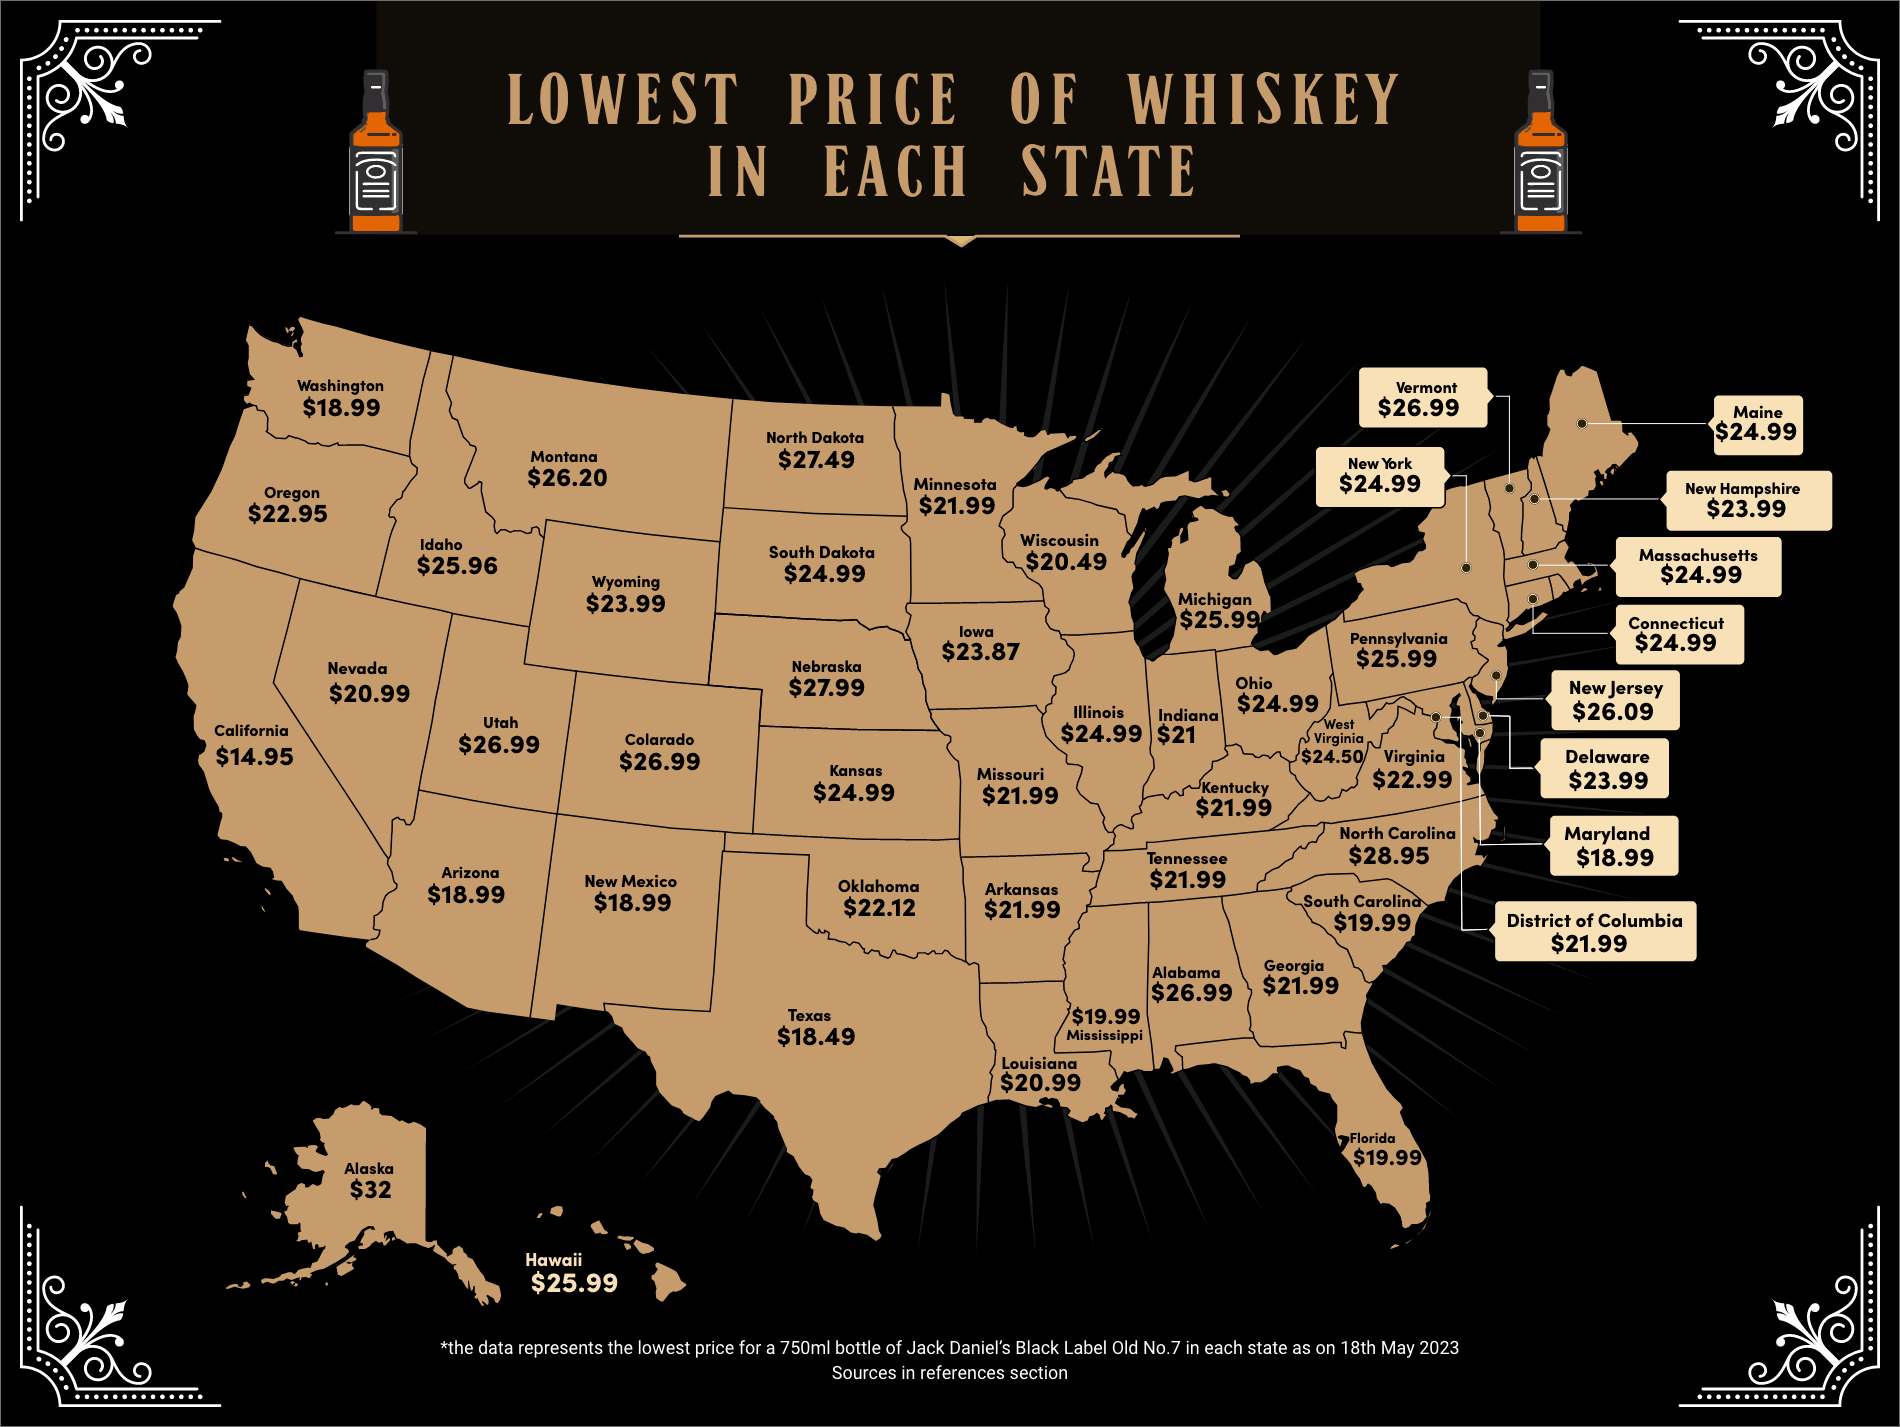 Lowest price of whiskey in each state